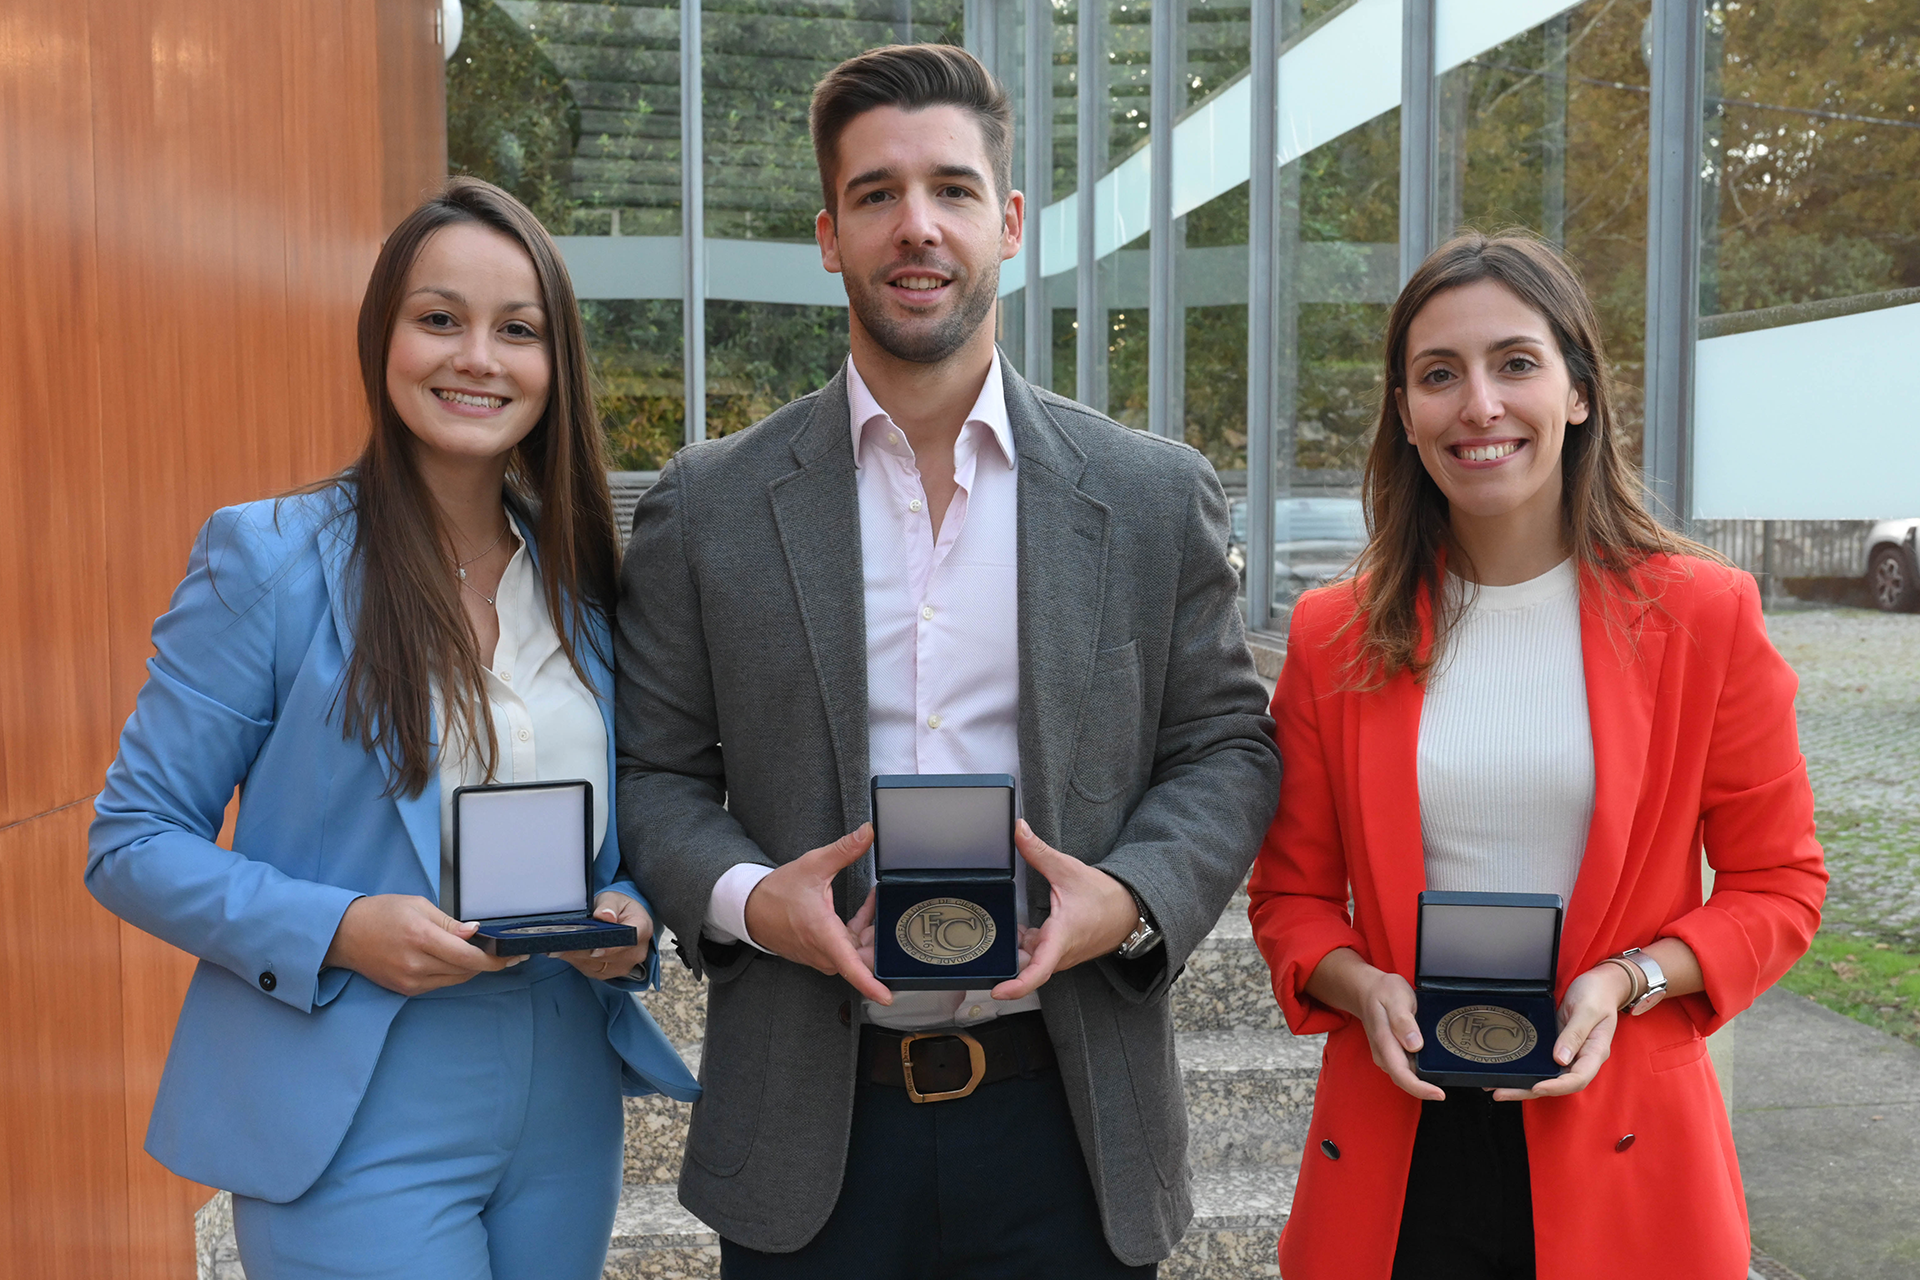 Students receive medals for completing their doctor degrees